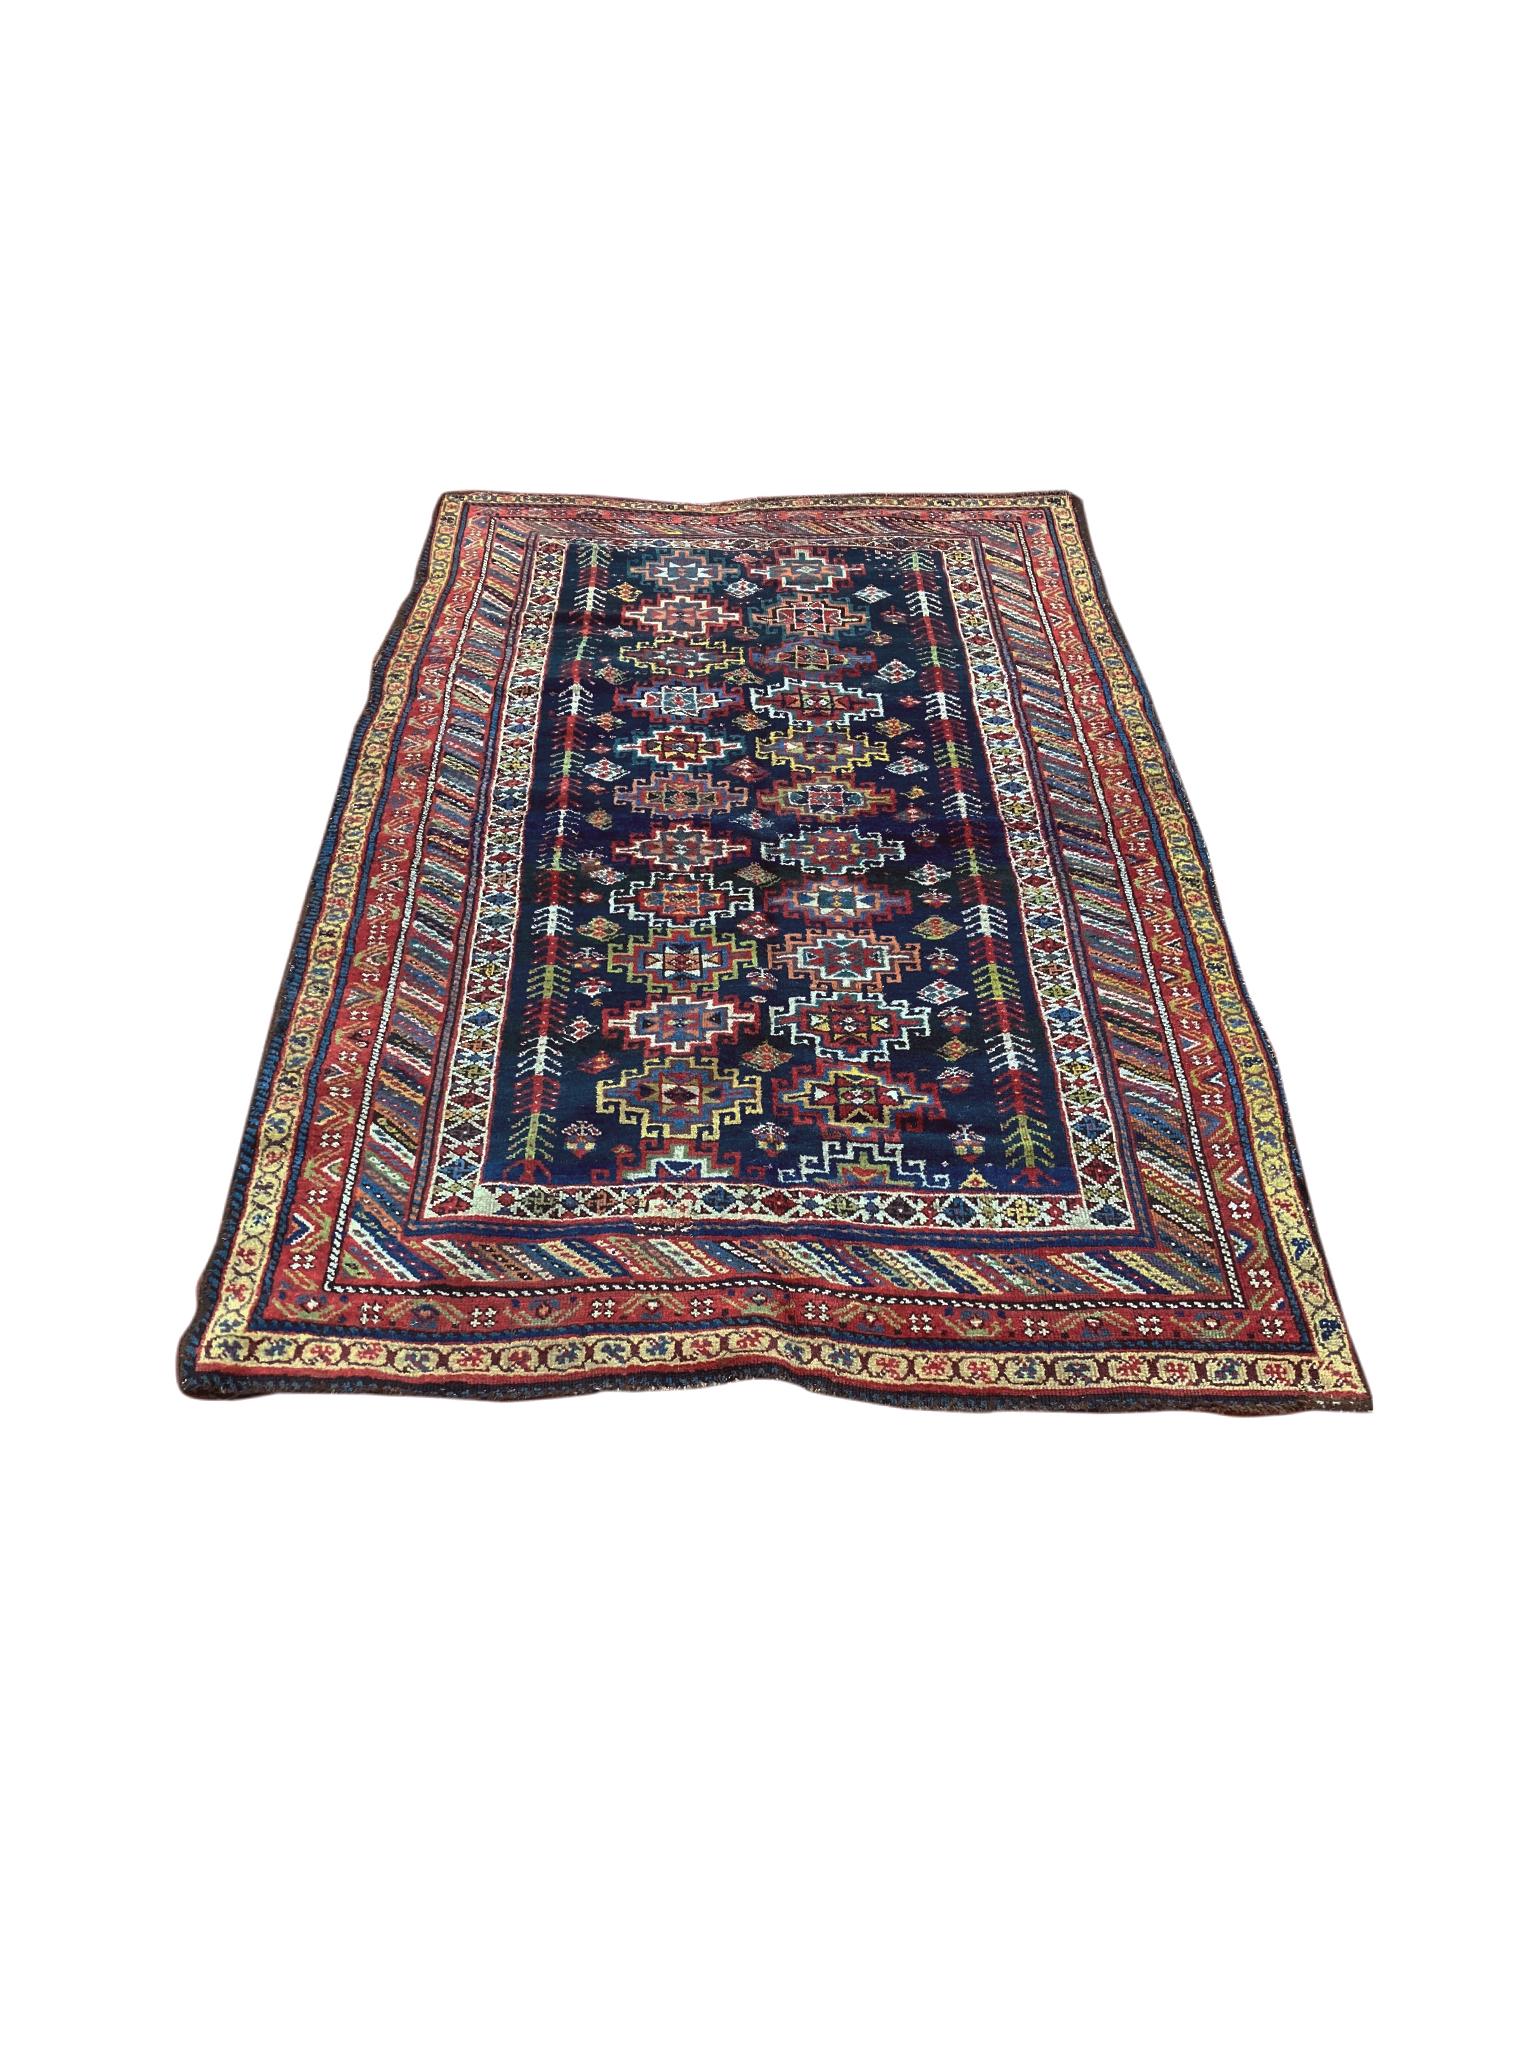 A vintage Kurdish area rug with a rich palette of blues, yellows, and reds that are beautifully arranged into medallion motifs and geometric bands. The center field is a dark navy blue with two parallel rows of medallions and buta motifs. A series